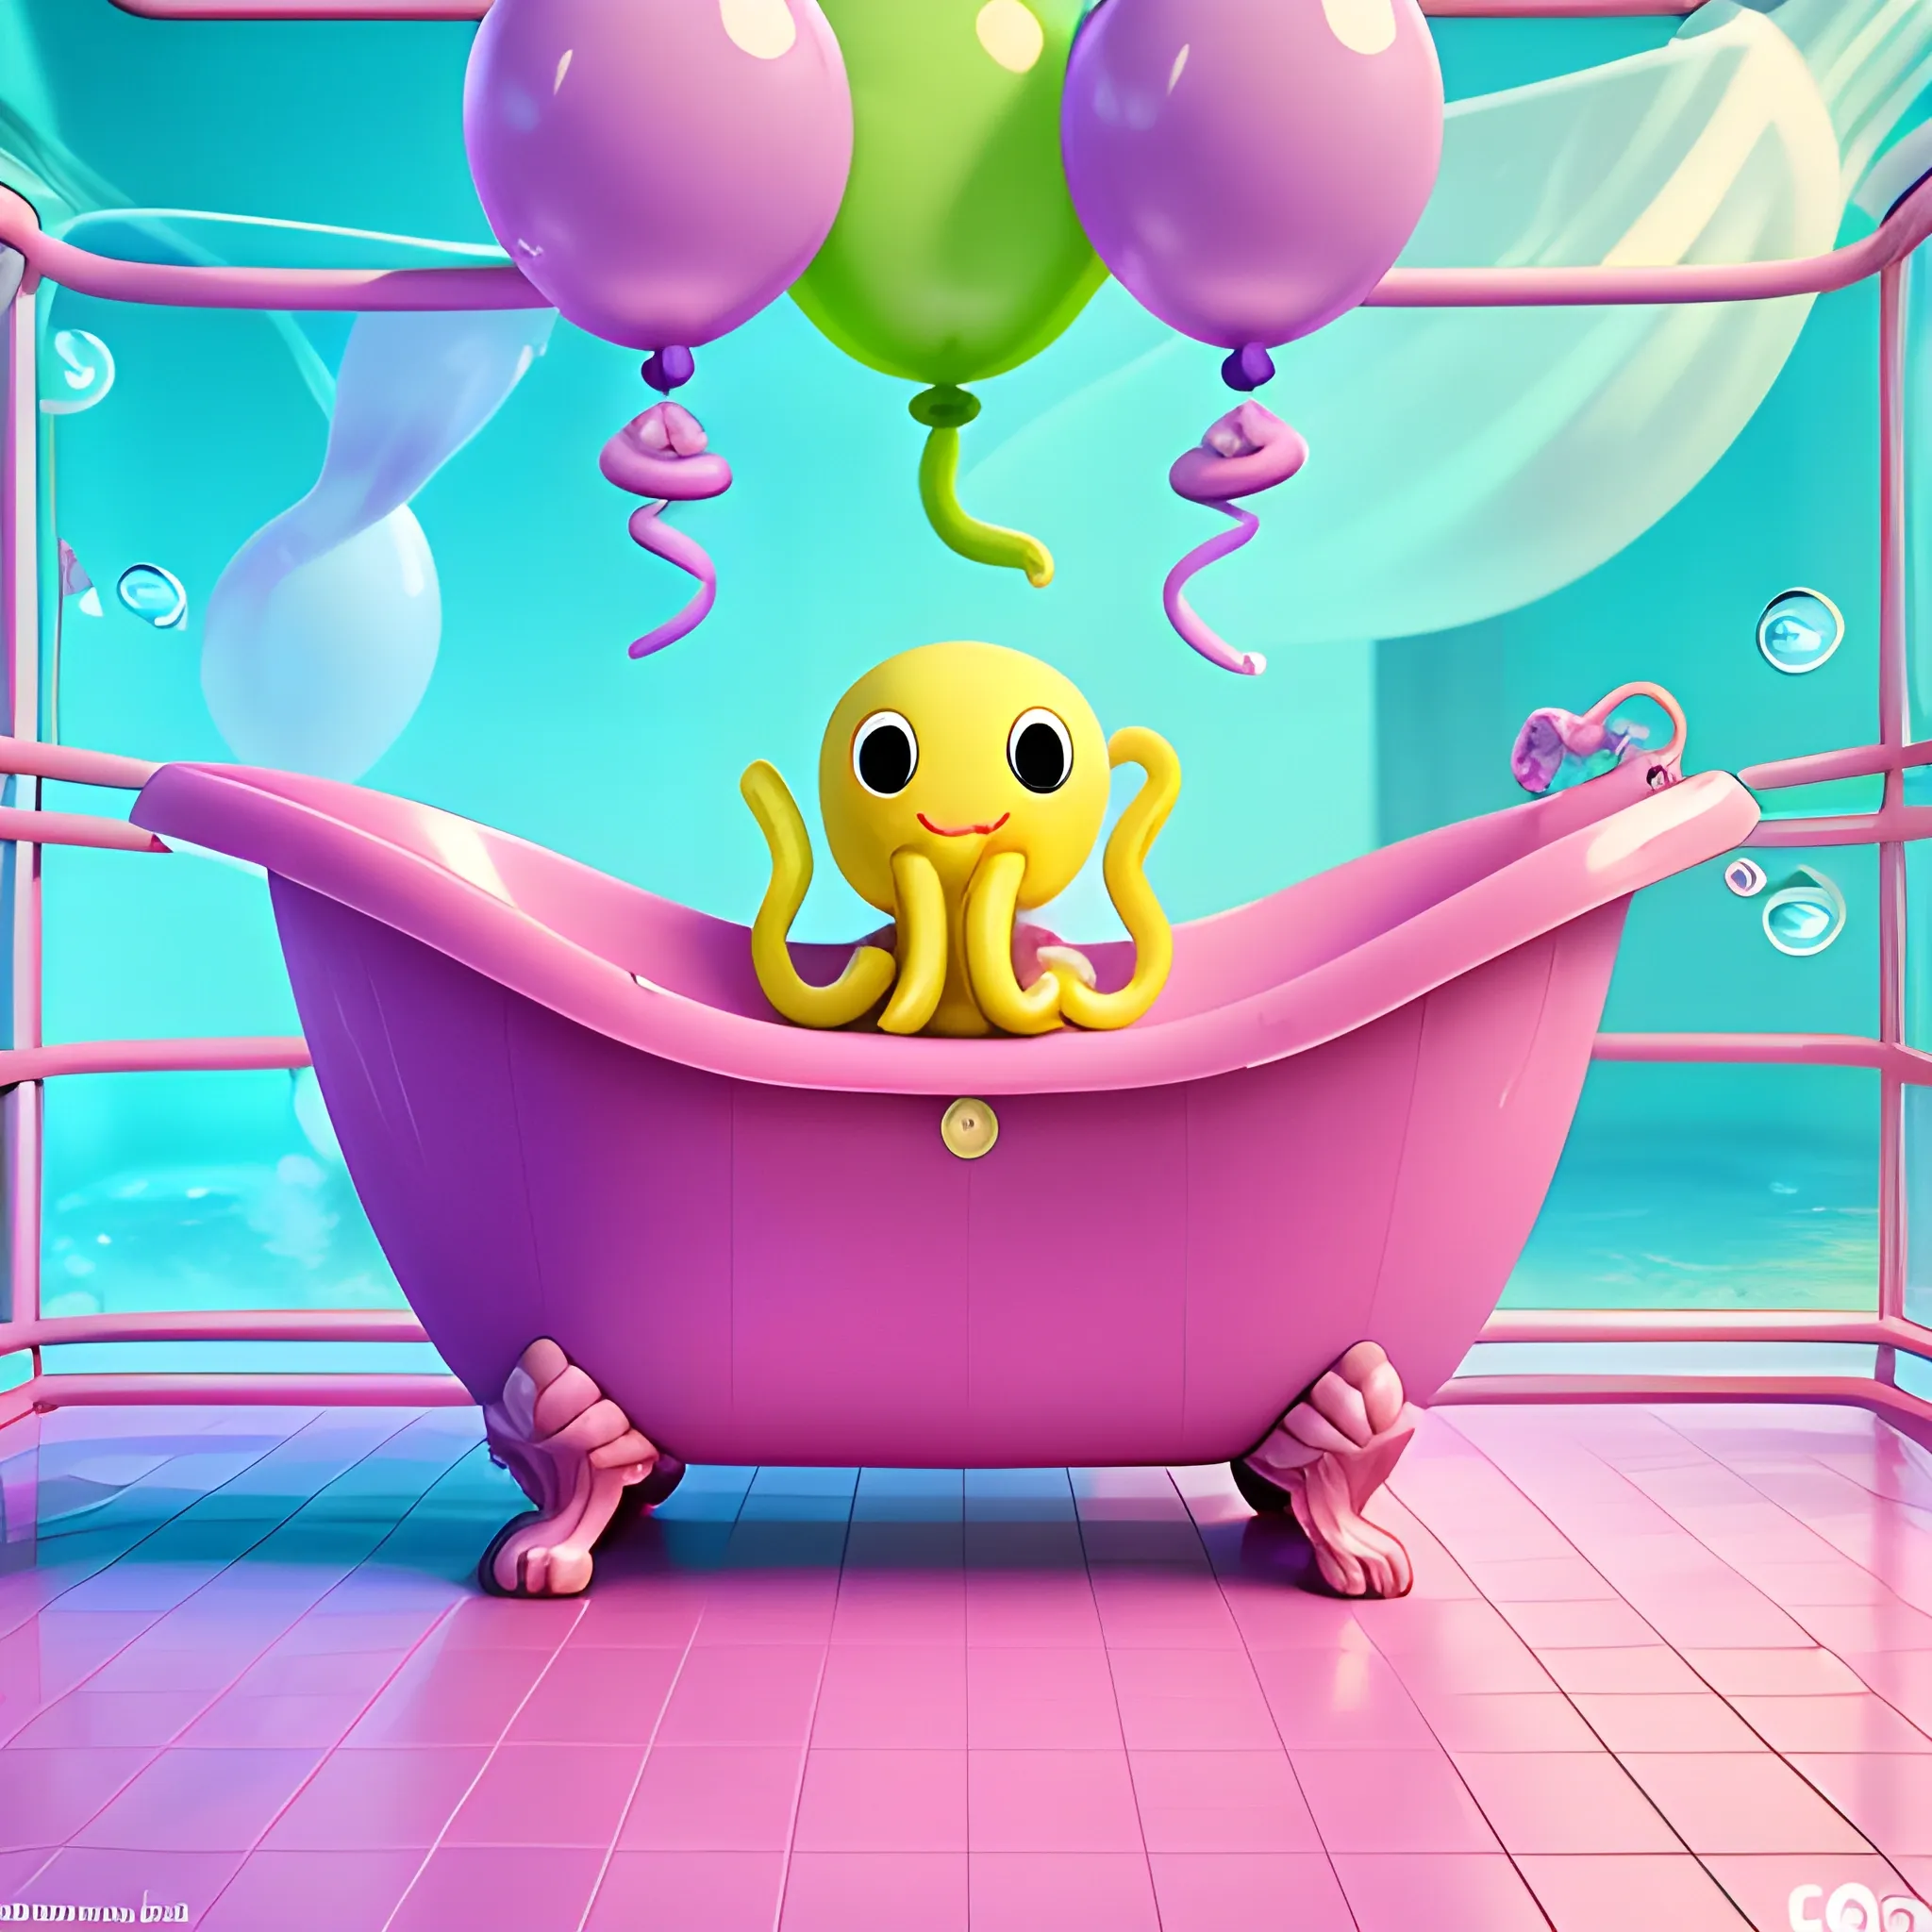 A banana looks like an octopus is relaxing into a bathtub, pink purple light blue and green bubbles, colorful balloons in the air, whimsical details, saturated colors, 3d Zbrush, CGI unreal engine, Cartoon